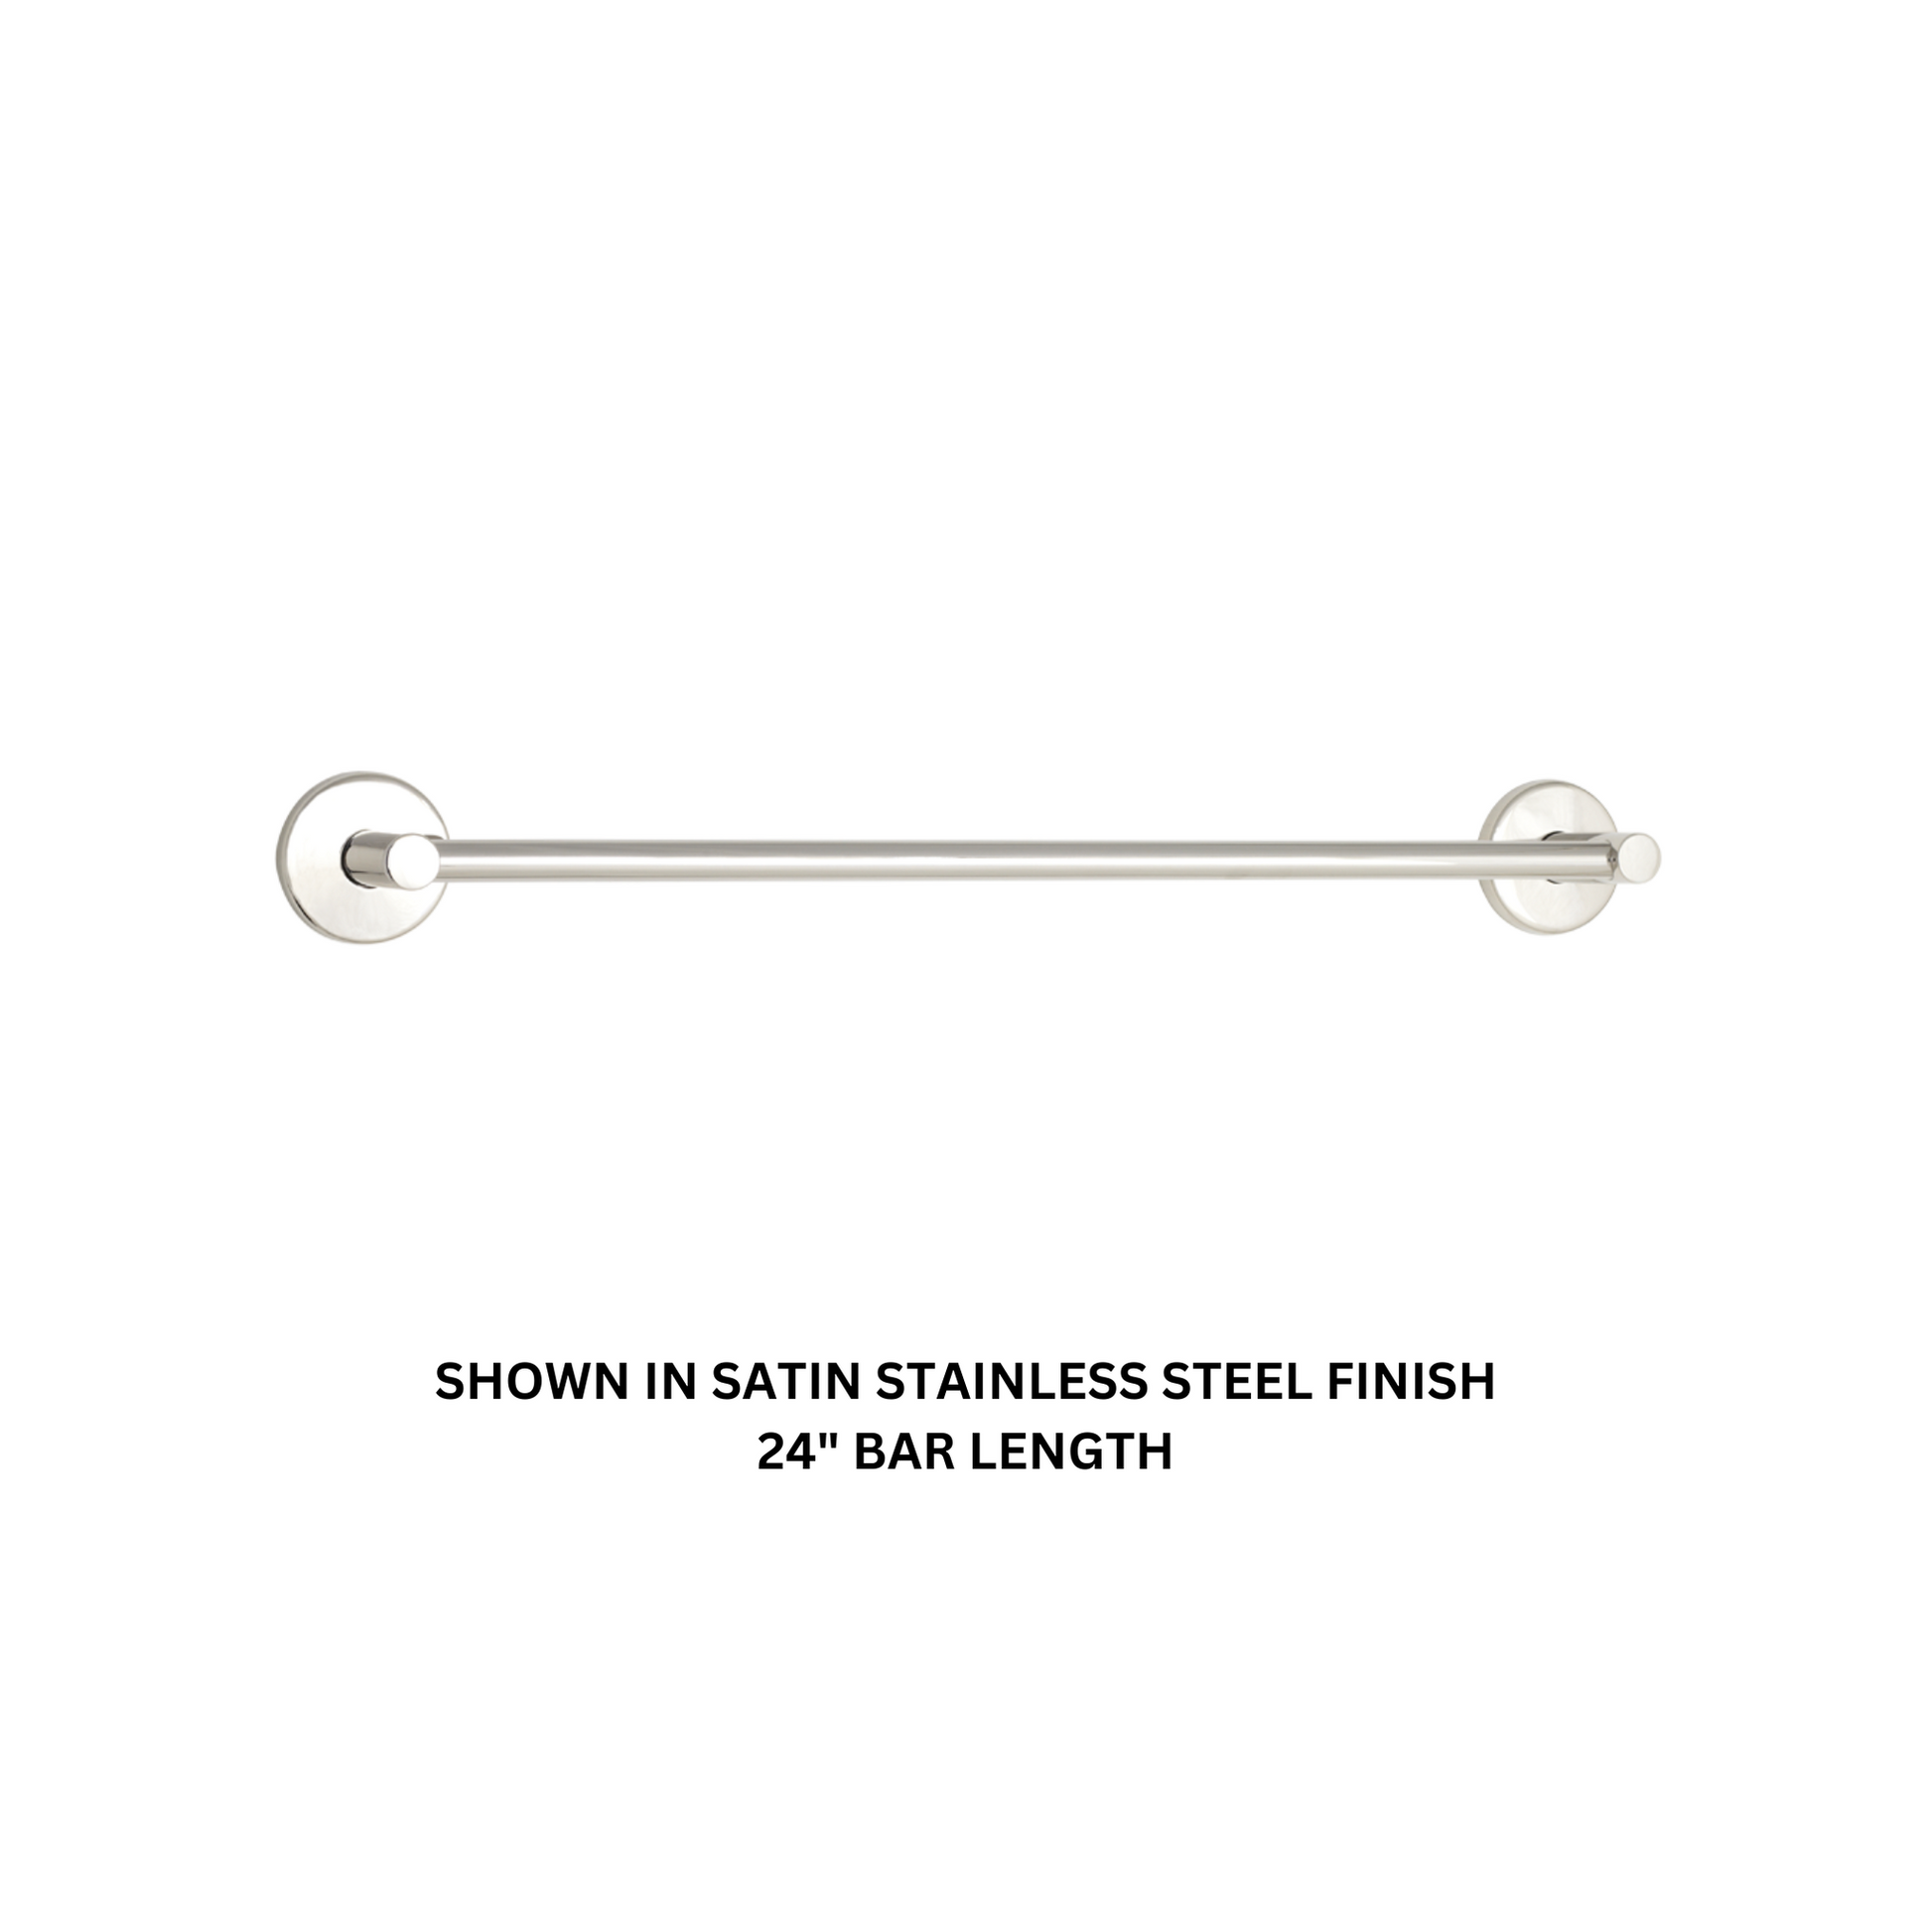 Seachrome Conorado Series 36" Polished Brass Powder Coat Concealed Mounting Flange Single Towel Bar